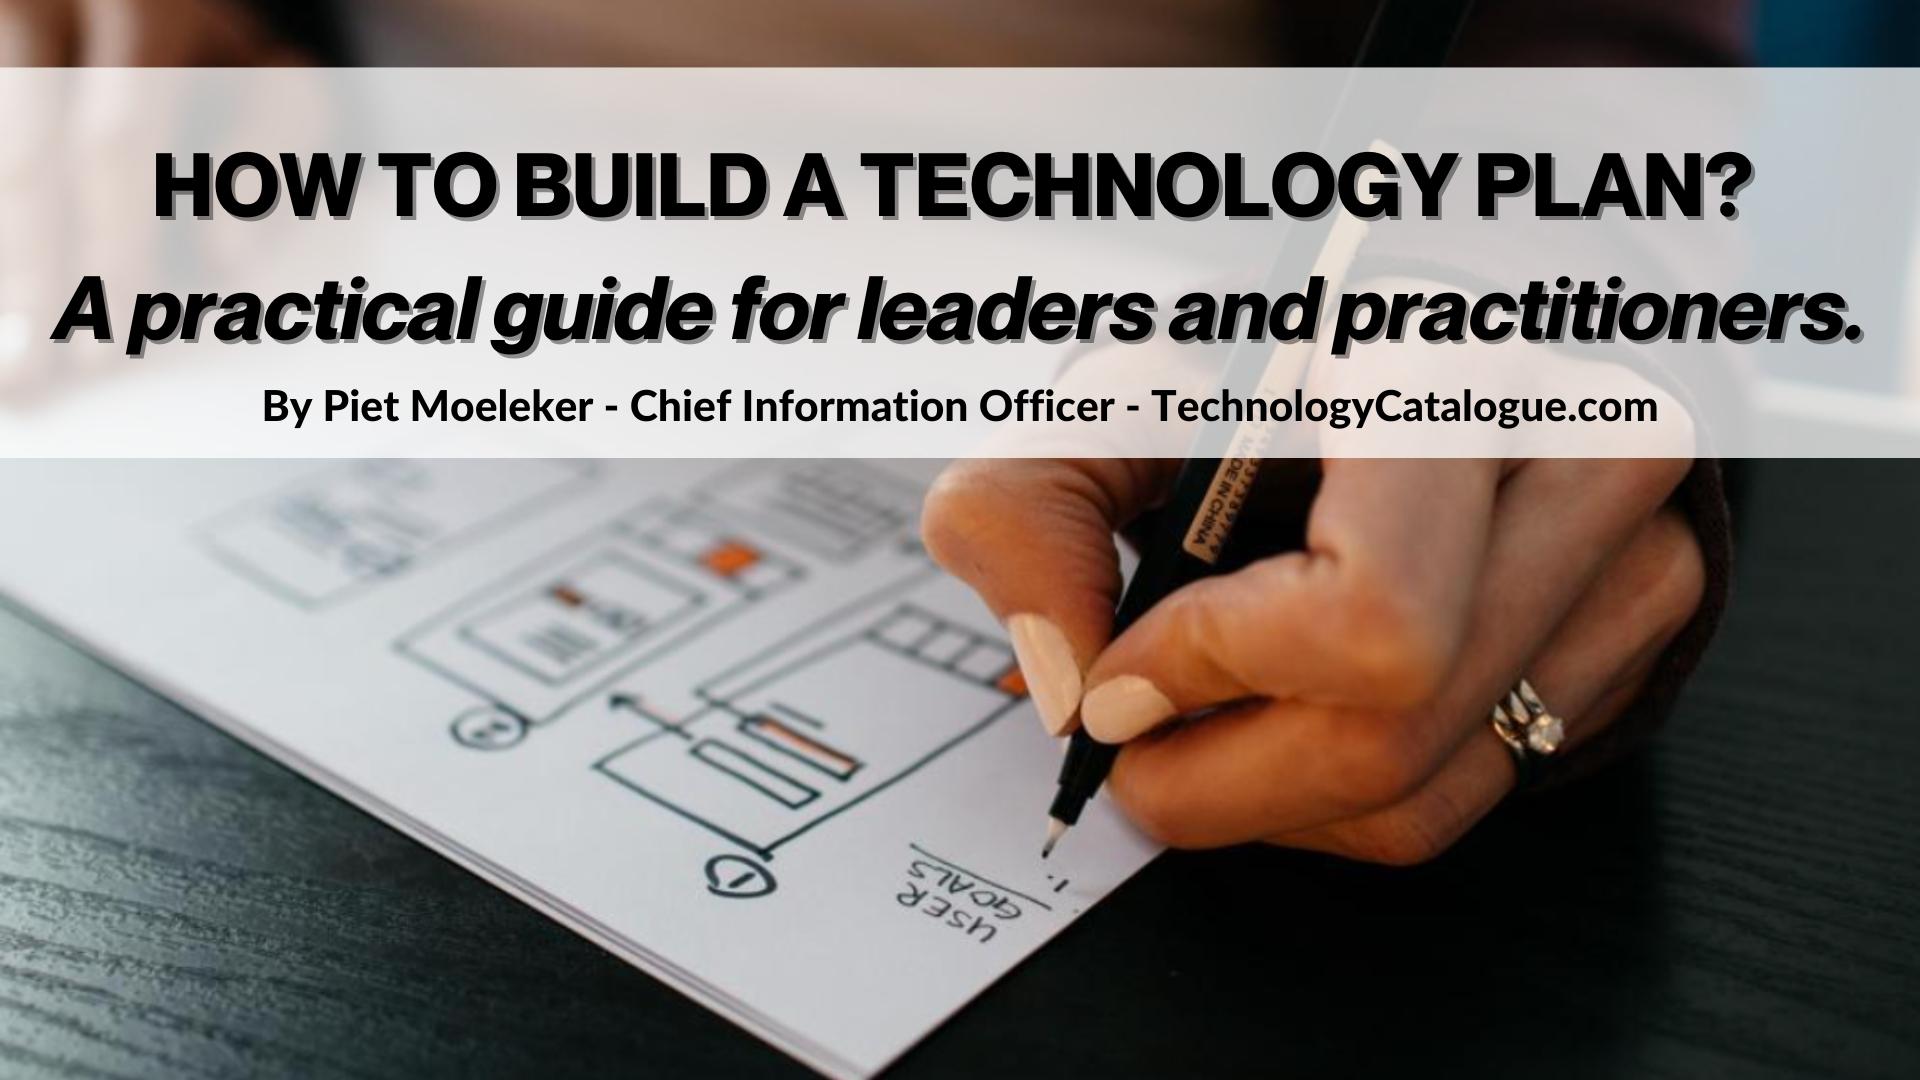 How to build a technology plan?